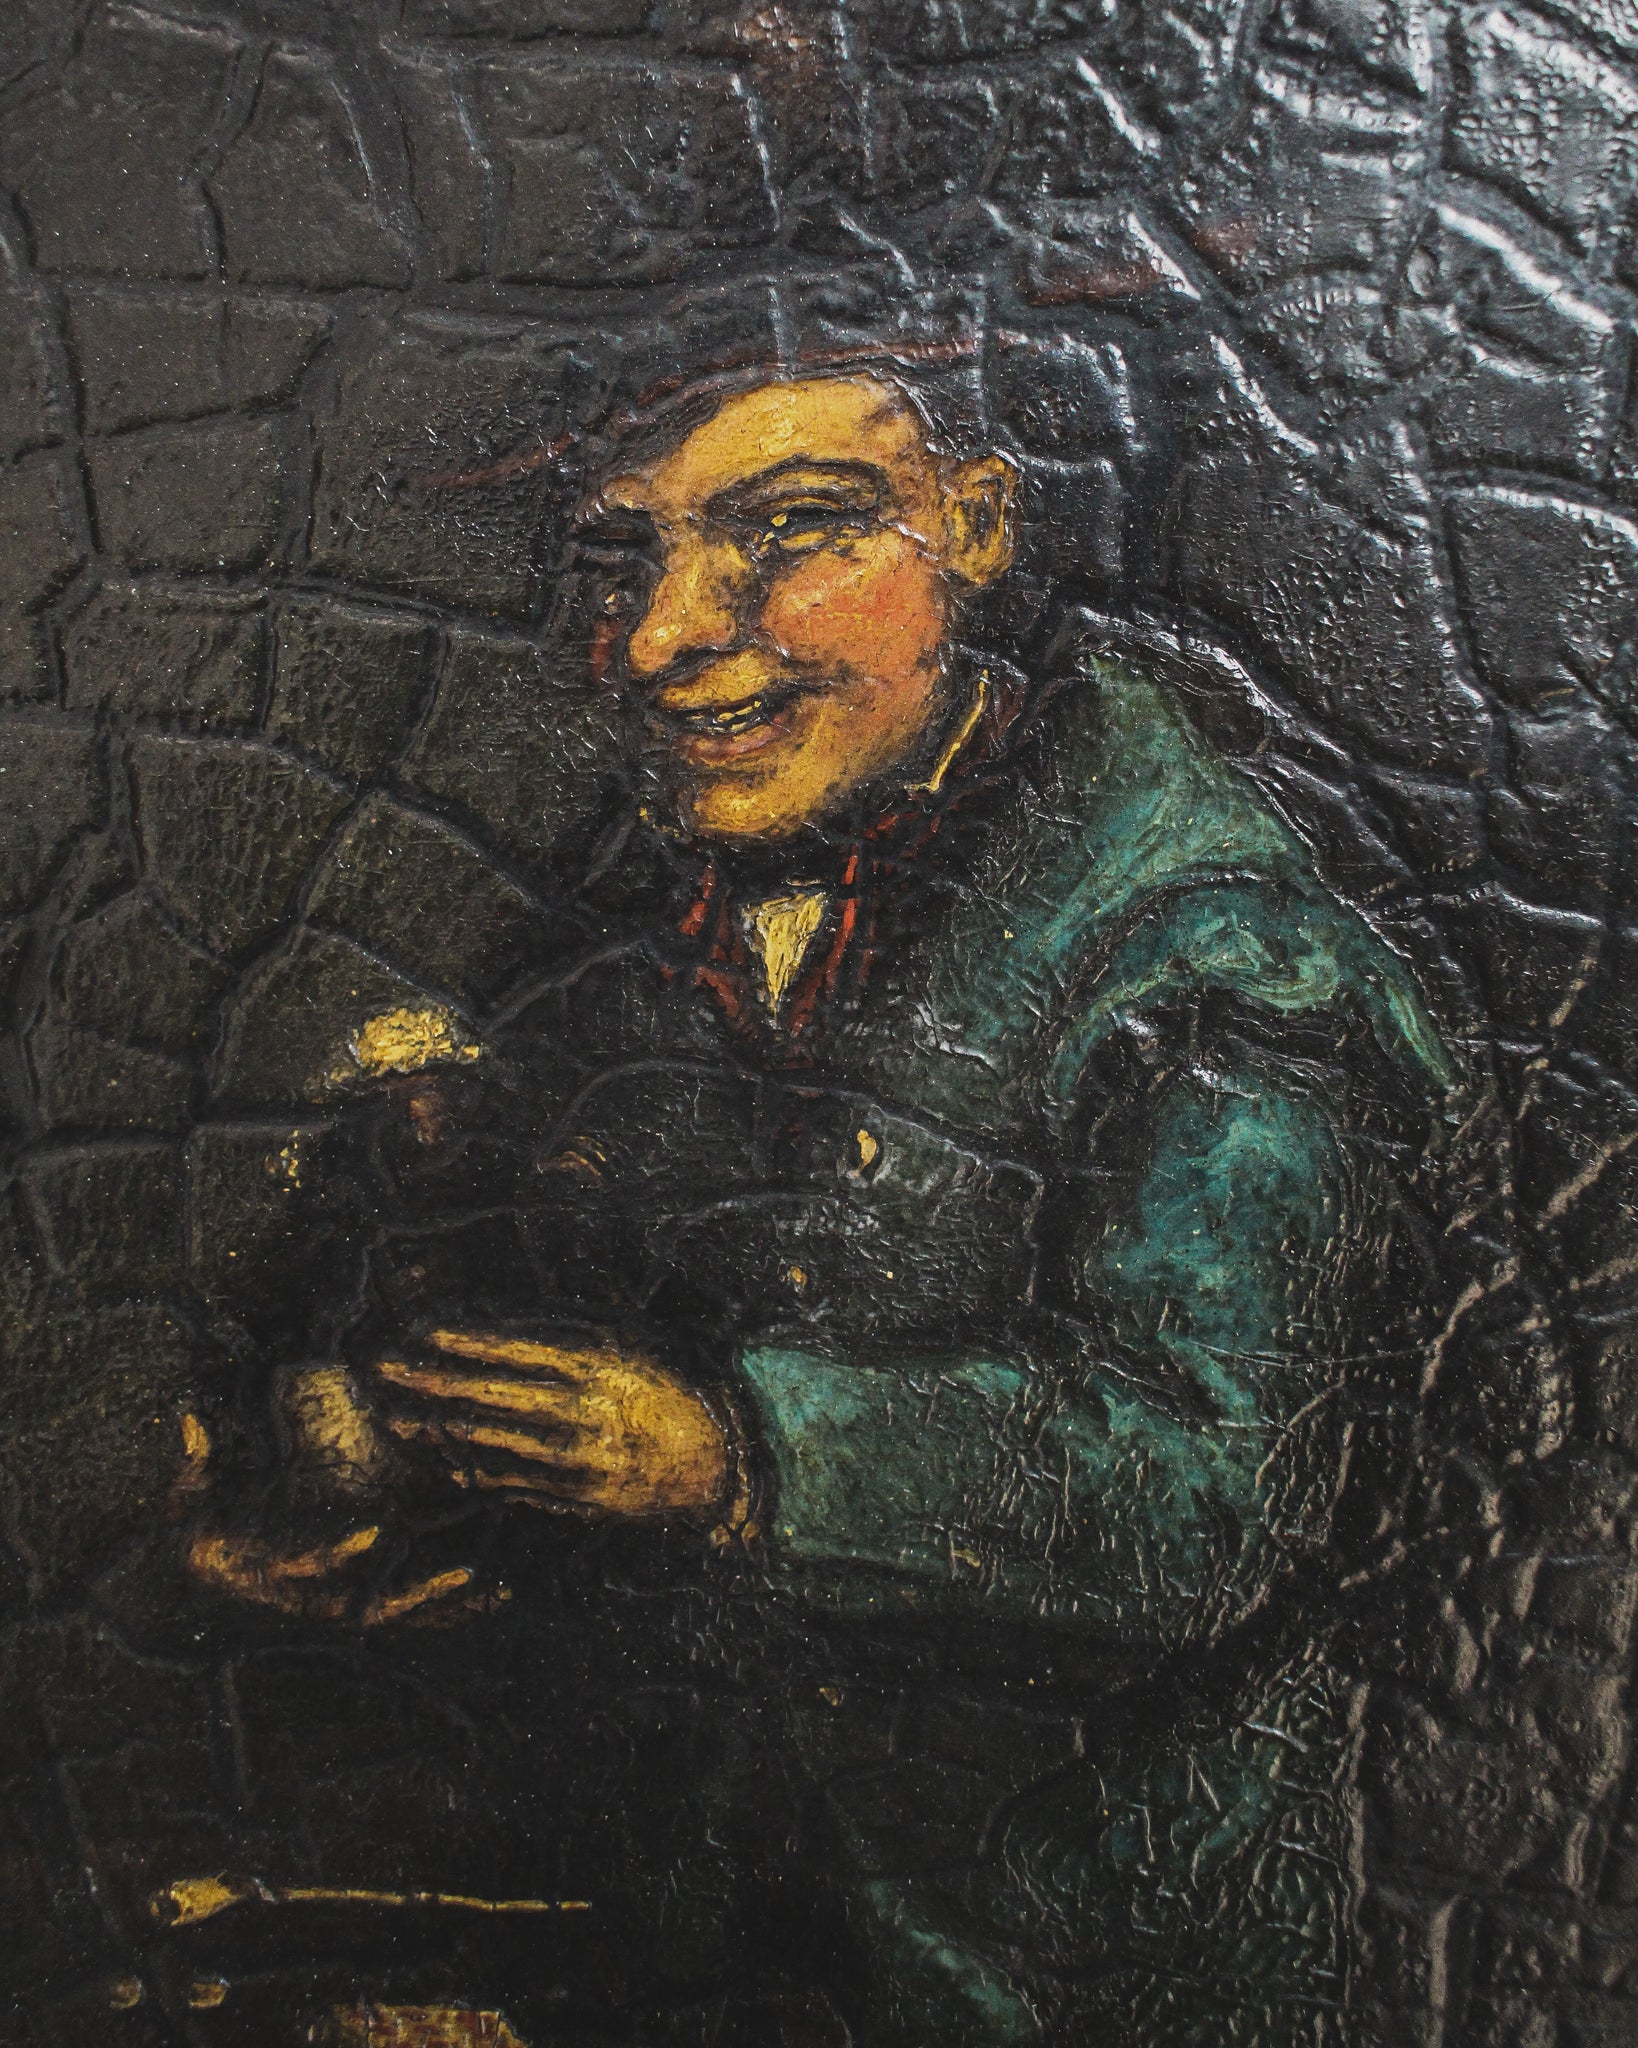 Grotesque Alchemist, Attr. to David Teniers the Younger, Oil on Board